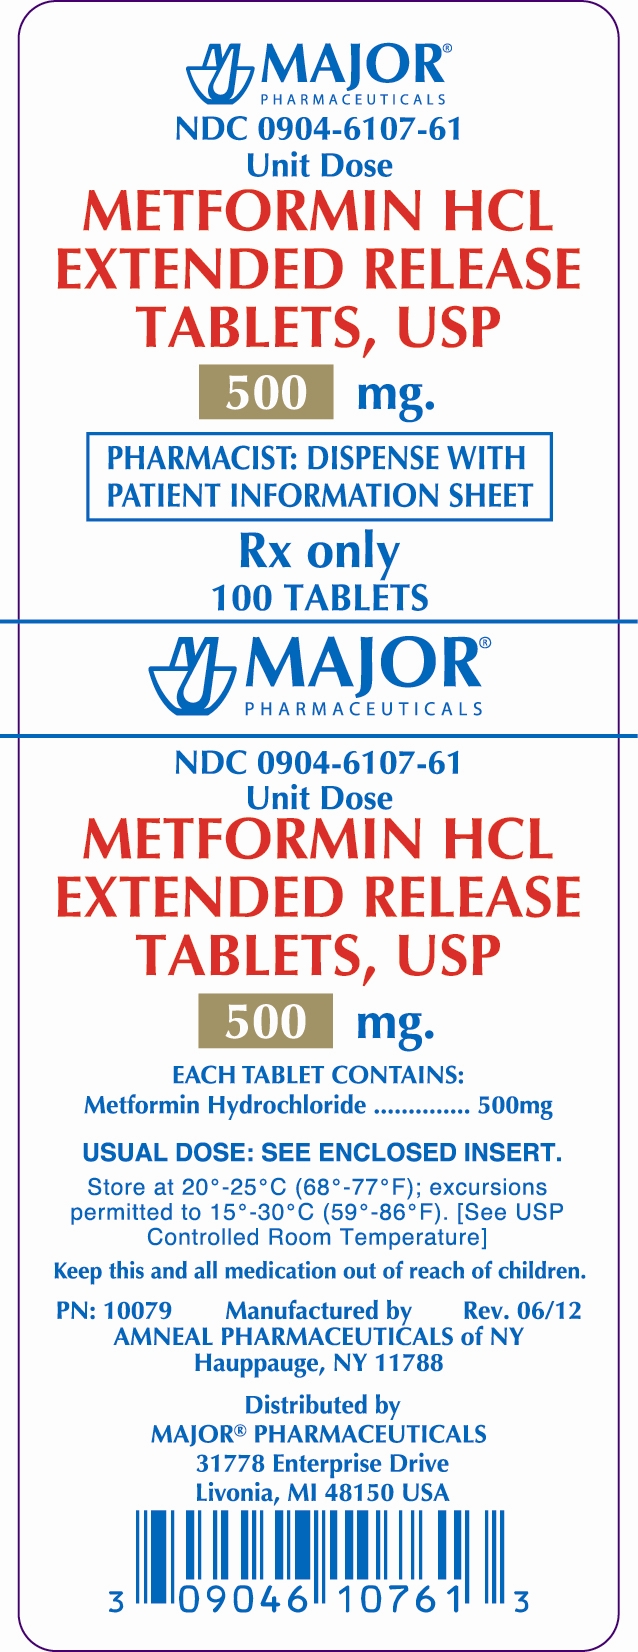 METFORMIN HCL EXTENDED RELEASE TABLETS, USP 500MG